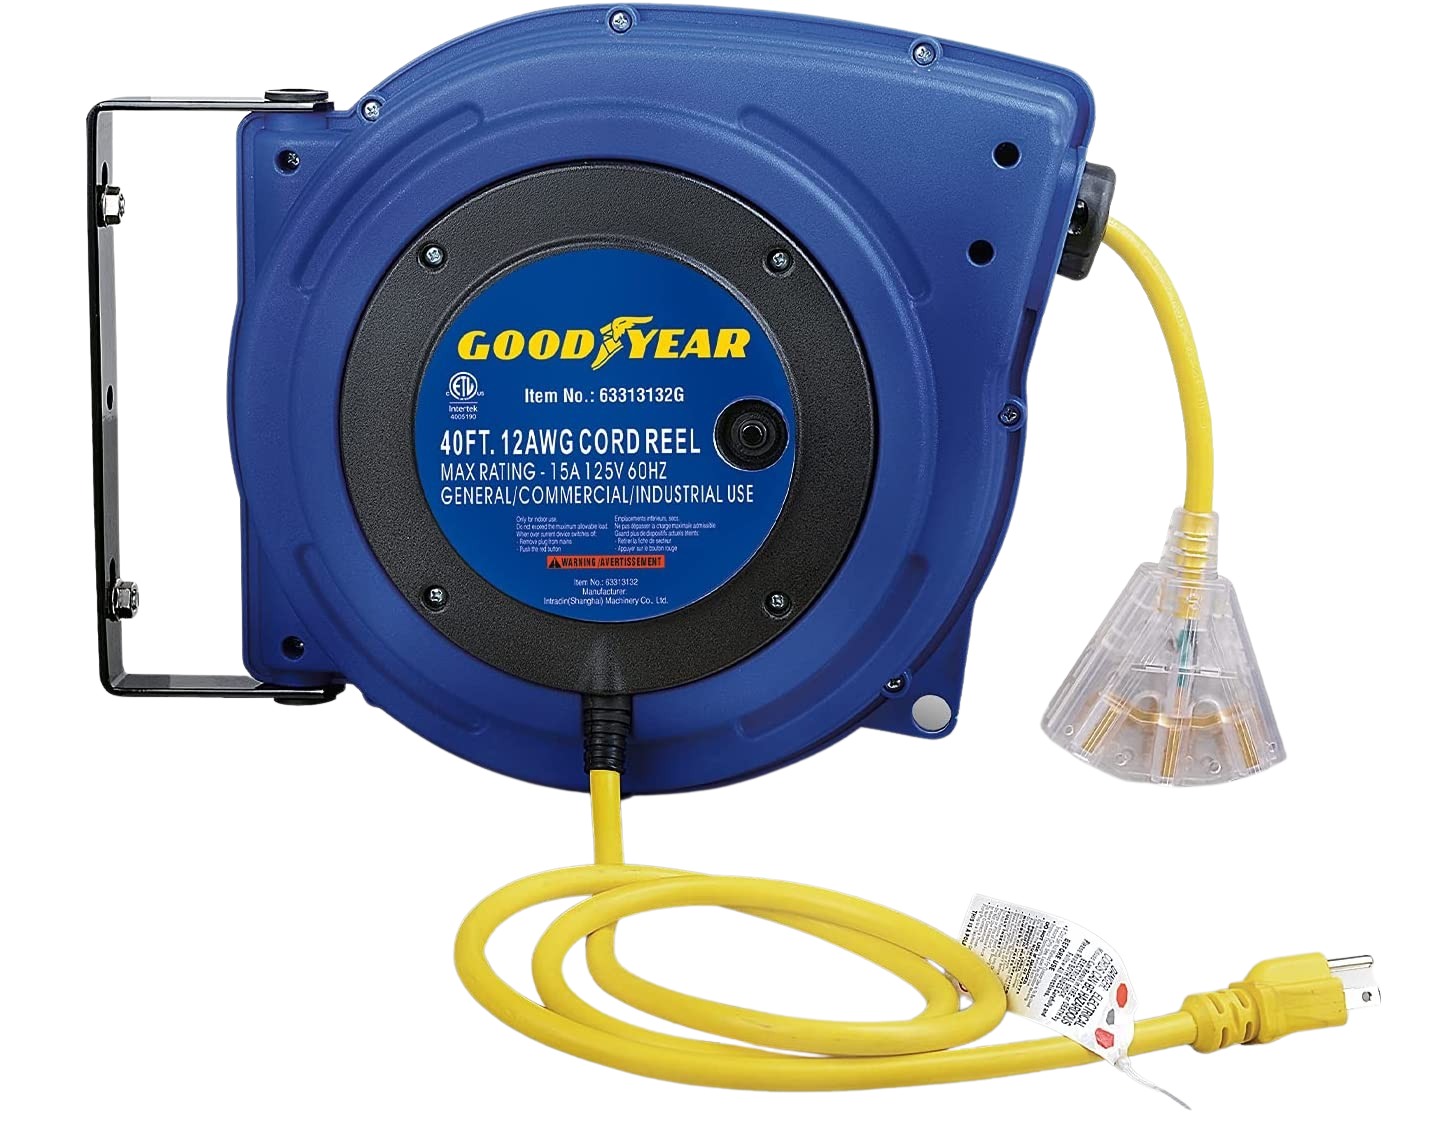 Goodyear 12 AWG x 40' Retractable Extension Cord Reel New